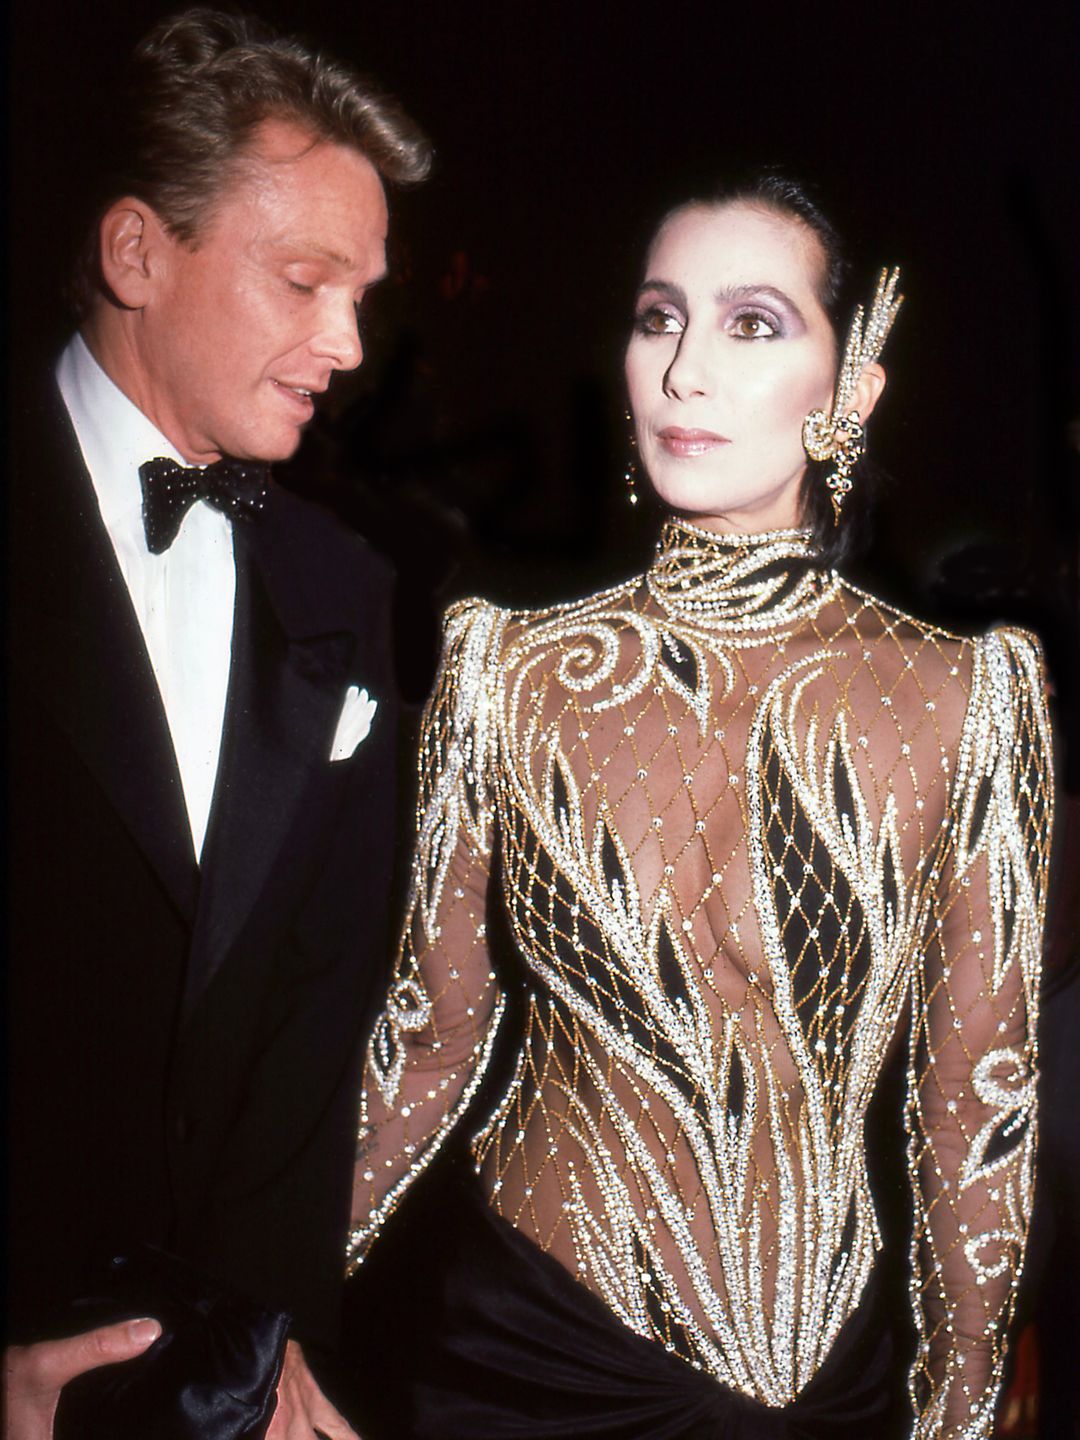 Cher brought major drama to the ball in 1985 